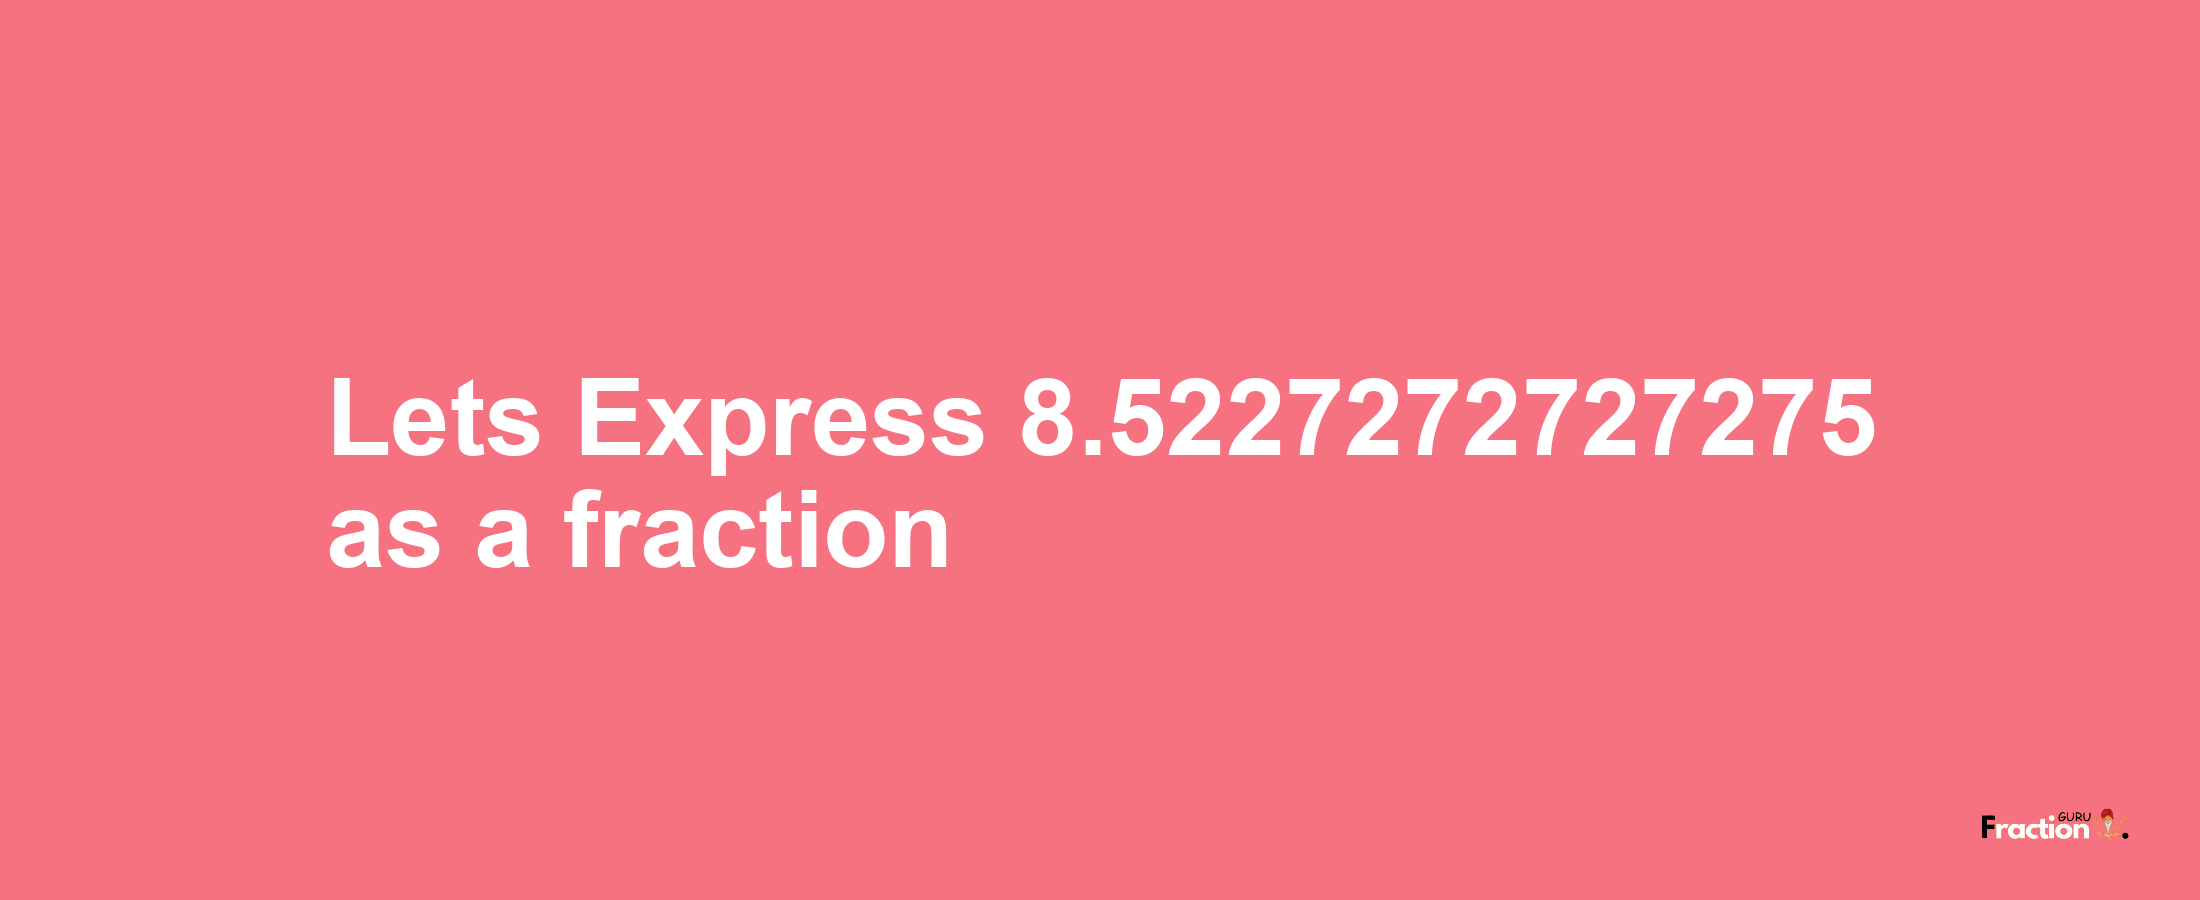 Lets Express 8.5227272727275 as afraction